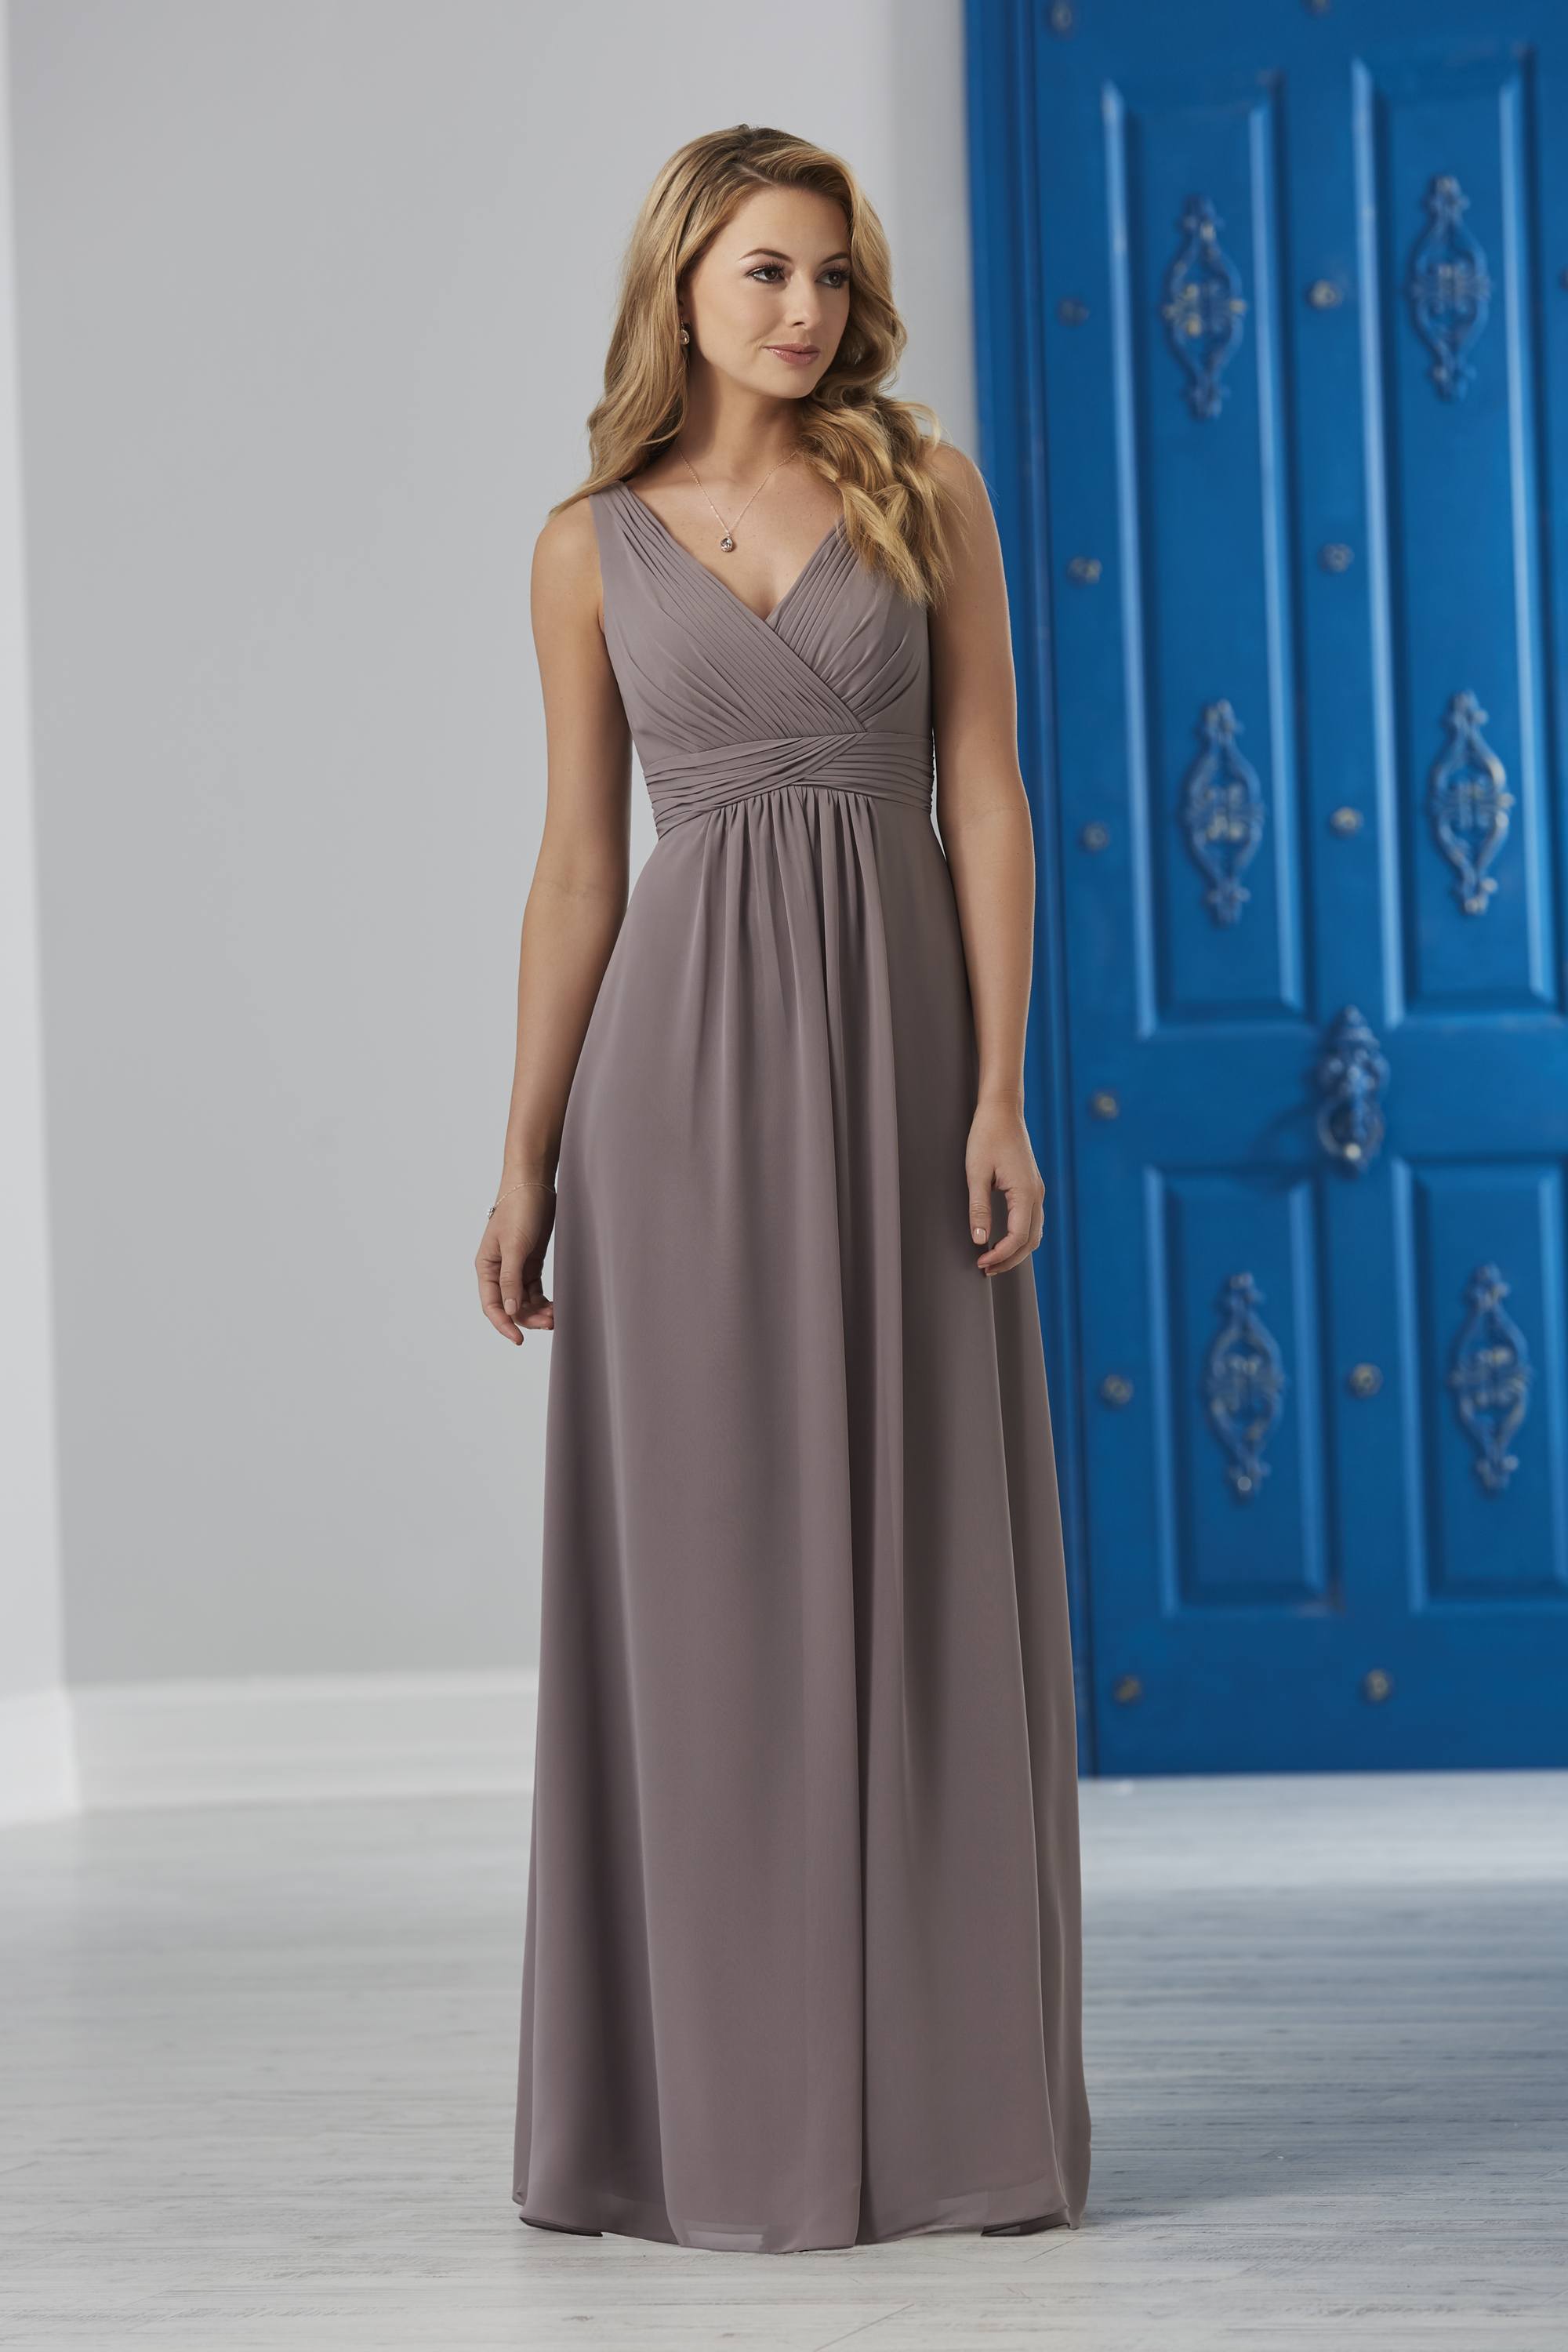 House Of Wu Bridesmaids Store, 58% OFF ...